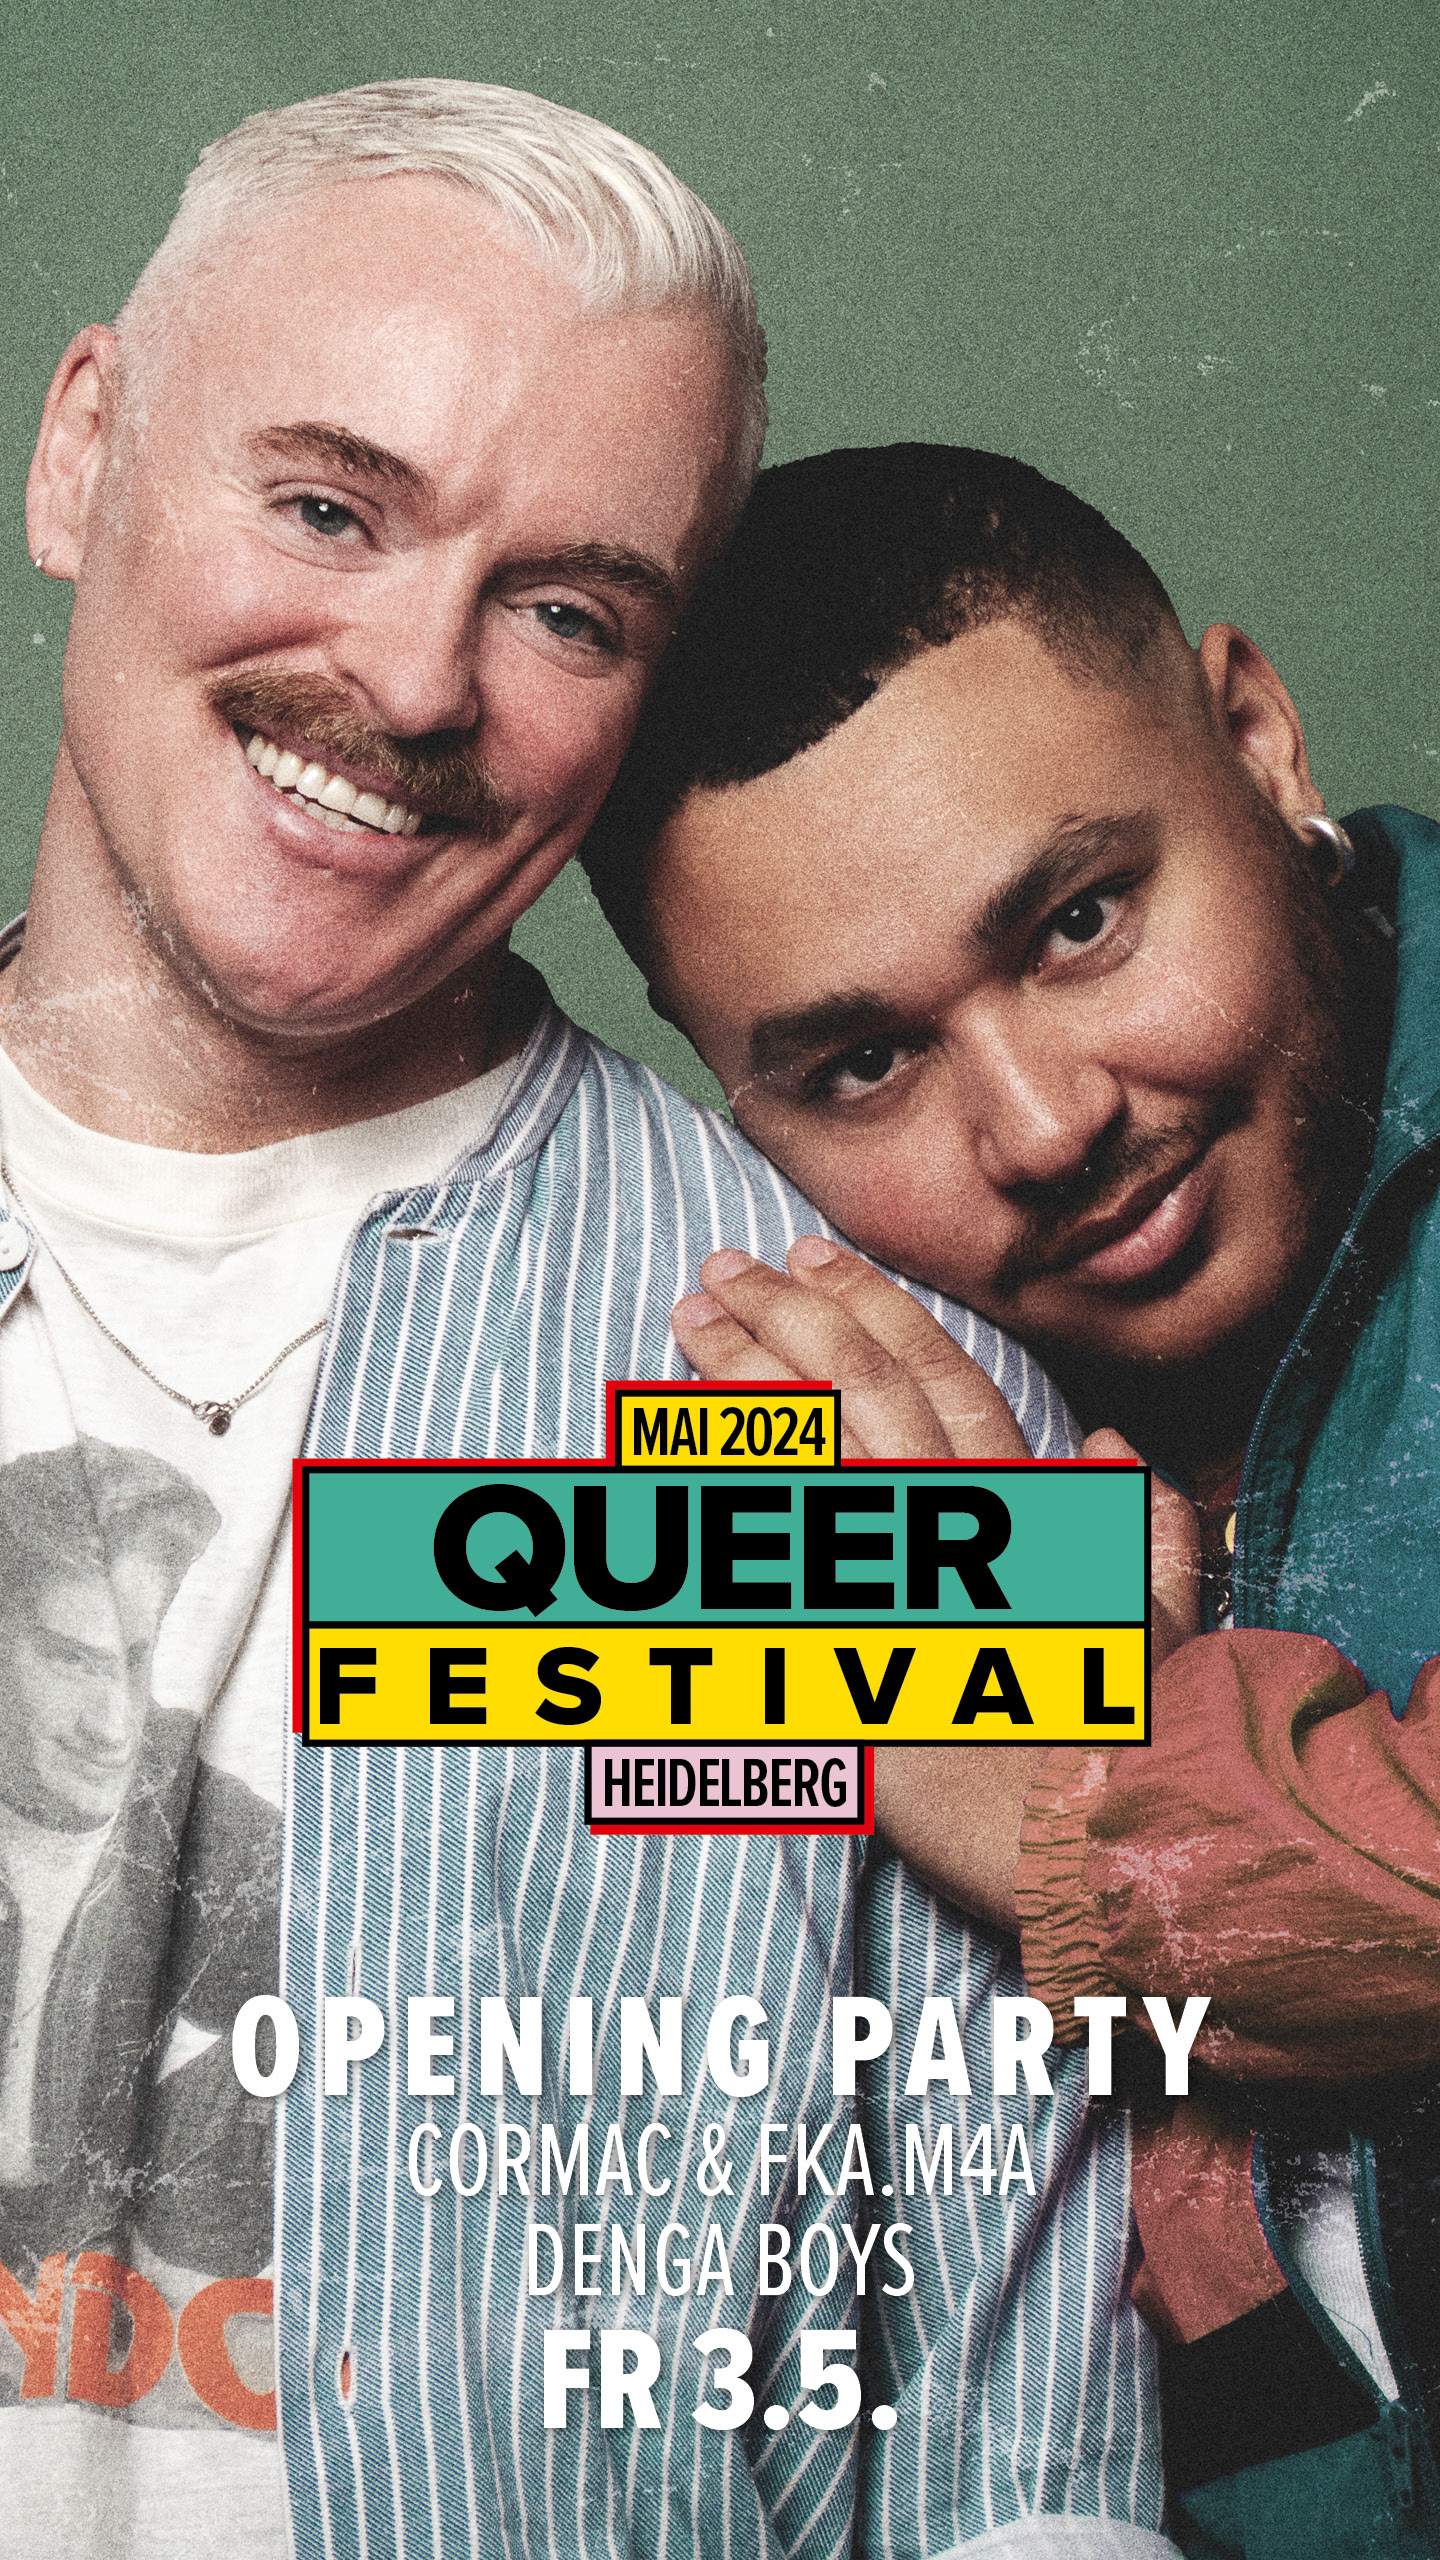 Queer Festival Opening Party with Cormac b2b fka.m4a & Denga Boys - フライヤー表